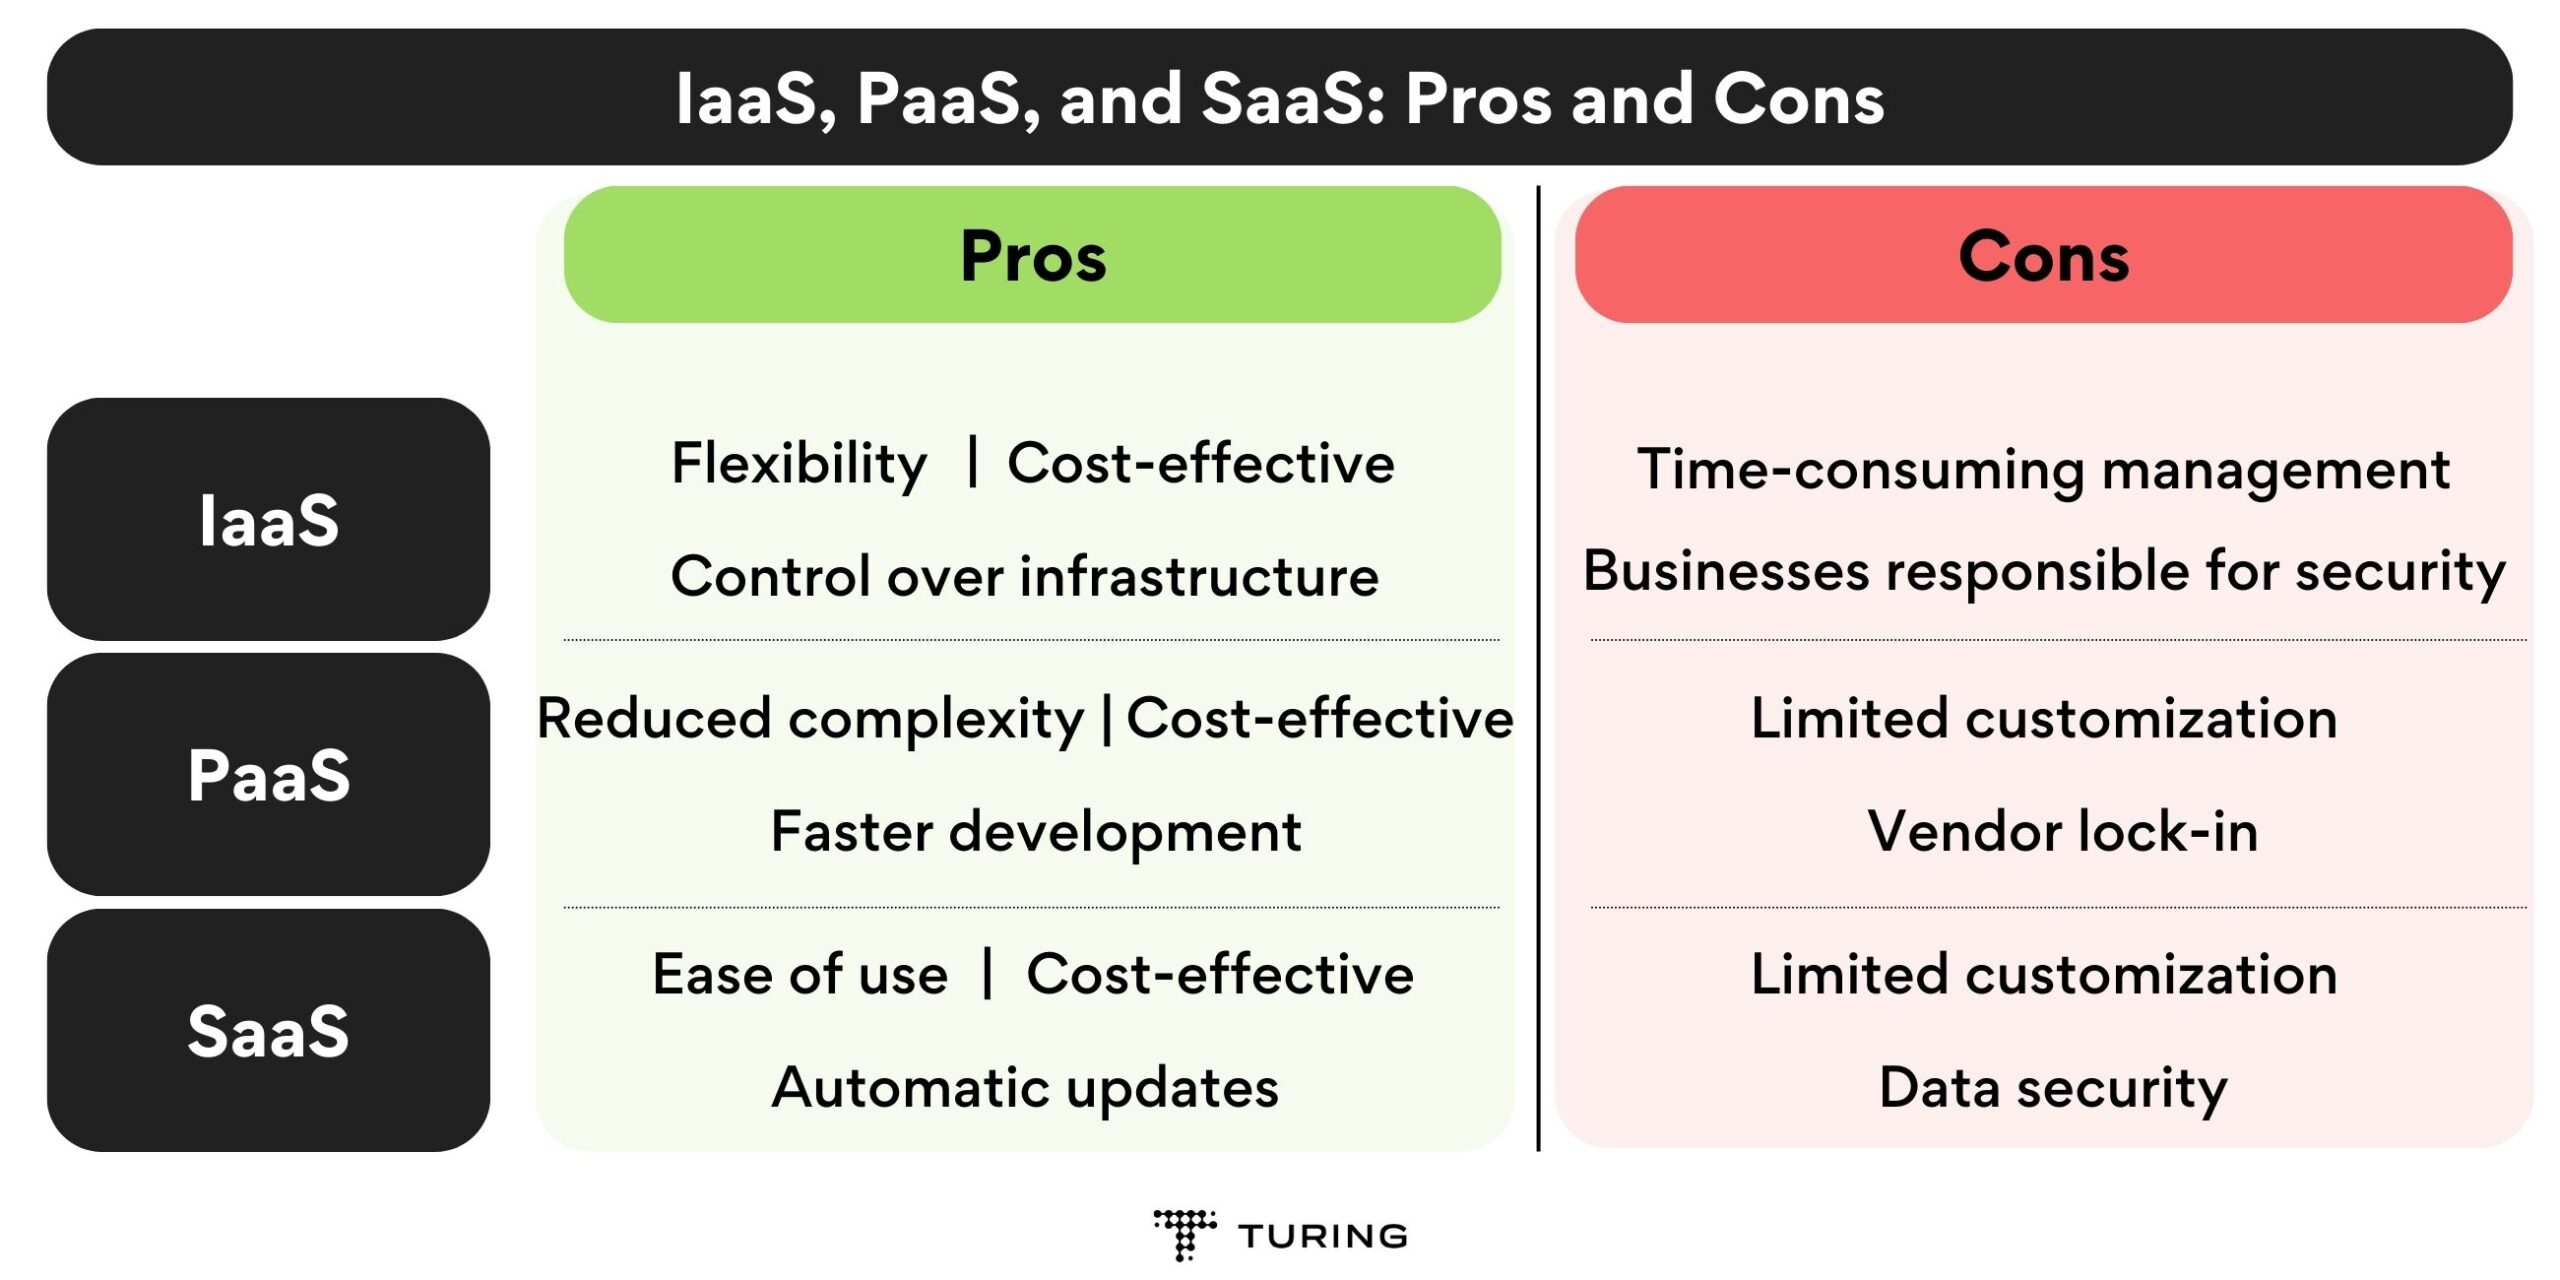 IaaS, PaaS, and SaaS: Pros and Cons